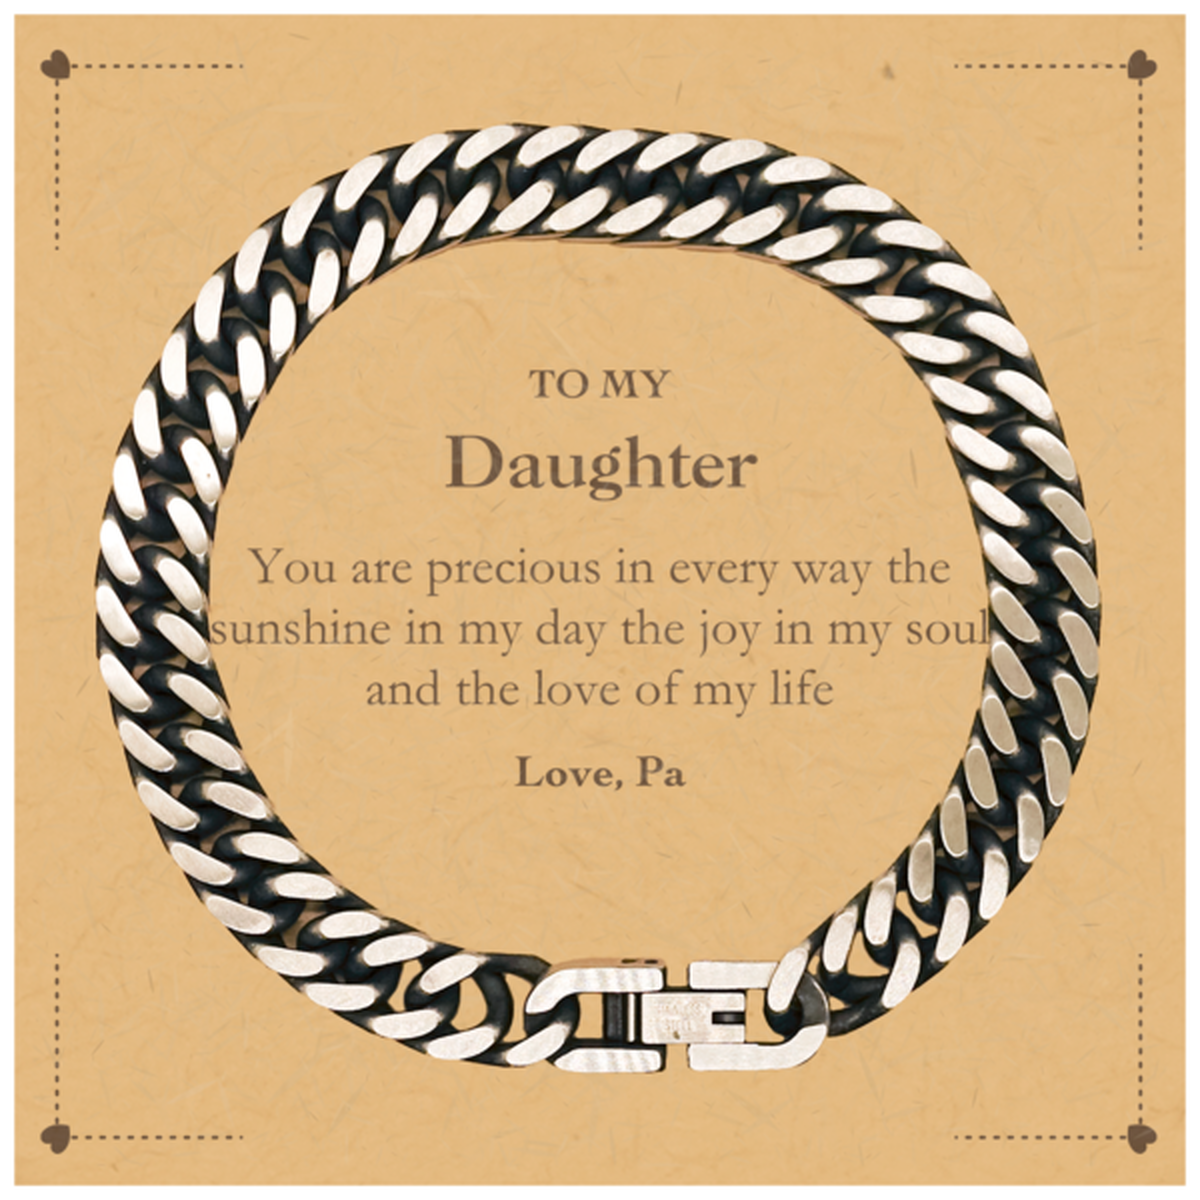 Graduation Gifts for Daughter Cuban Link Chain Bracelet Present from Pa, Christmas Daughter Birthday Gifts Daughter You are precious in every way the sunshine in my day. Love, Pa